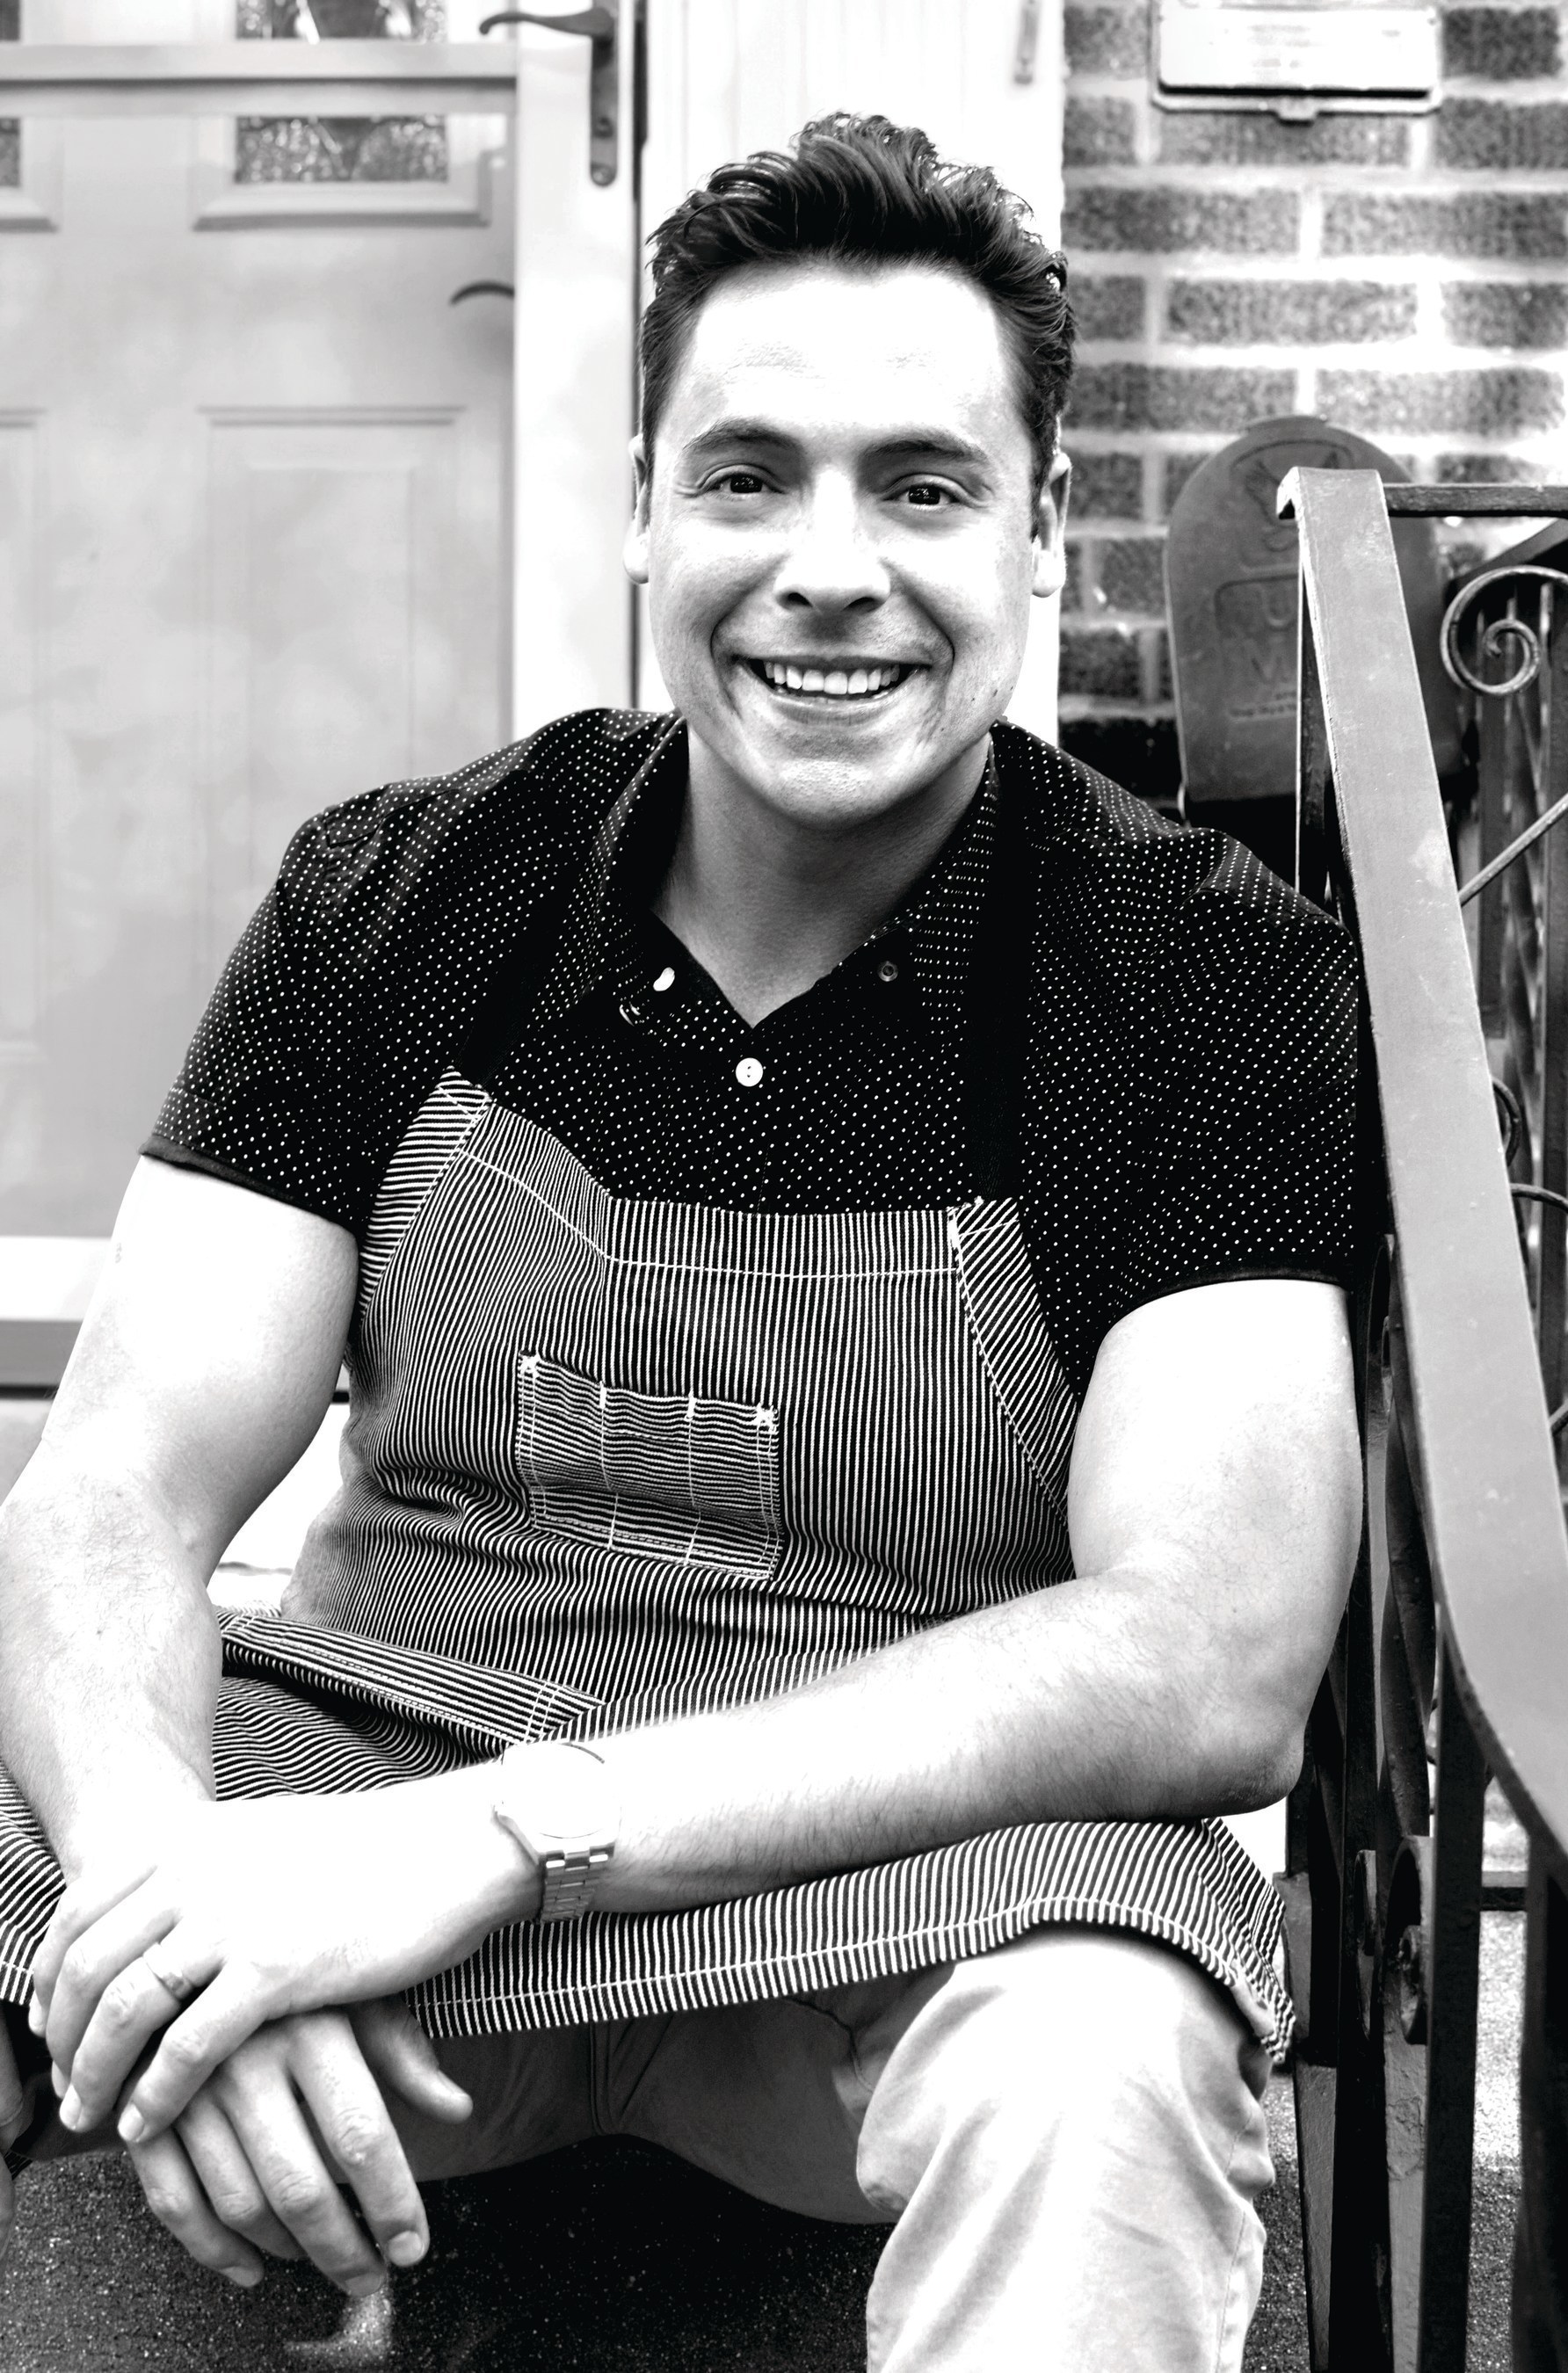 Celebrity chef Jeff Mauro Launches His First Consumer Brand, Pork & Mindy's